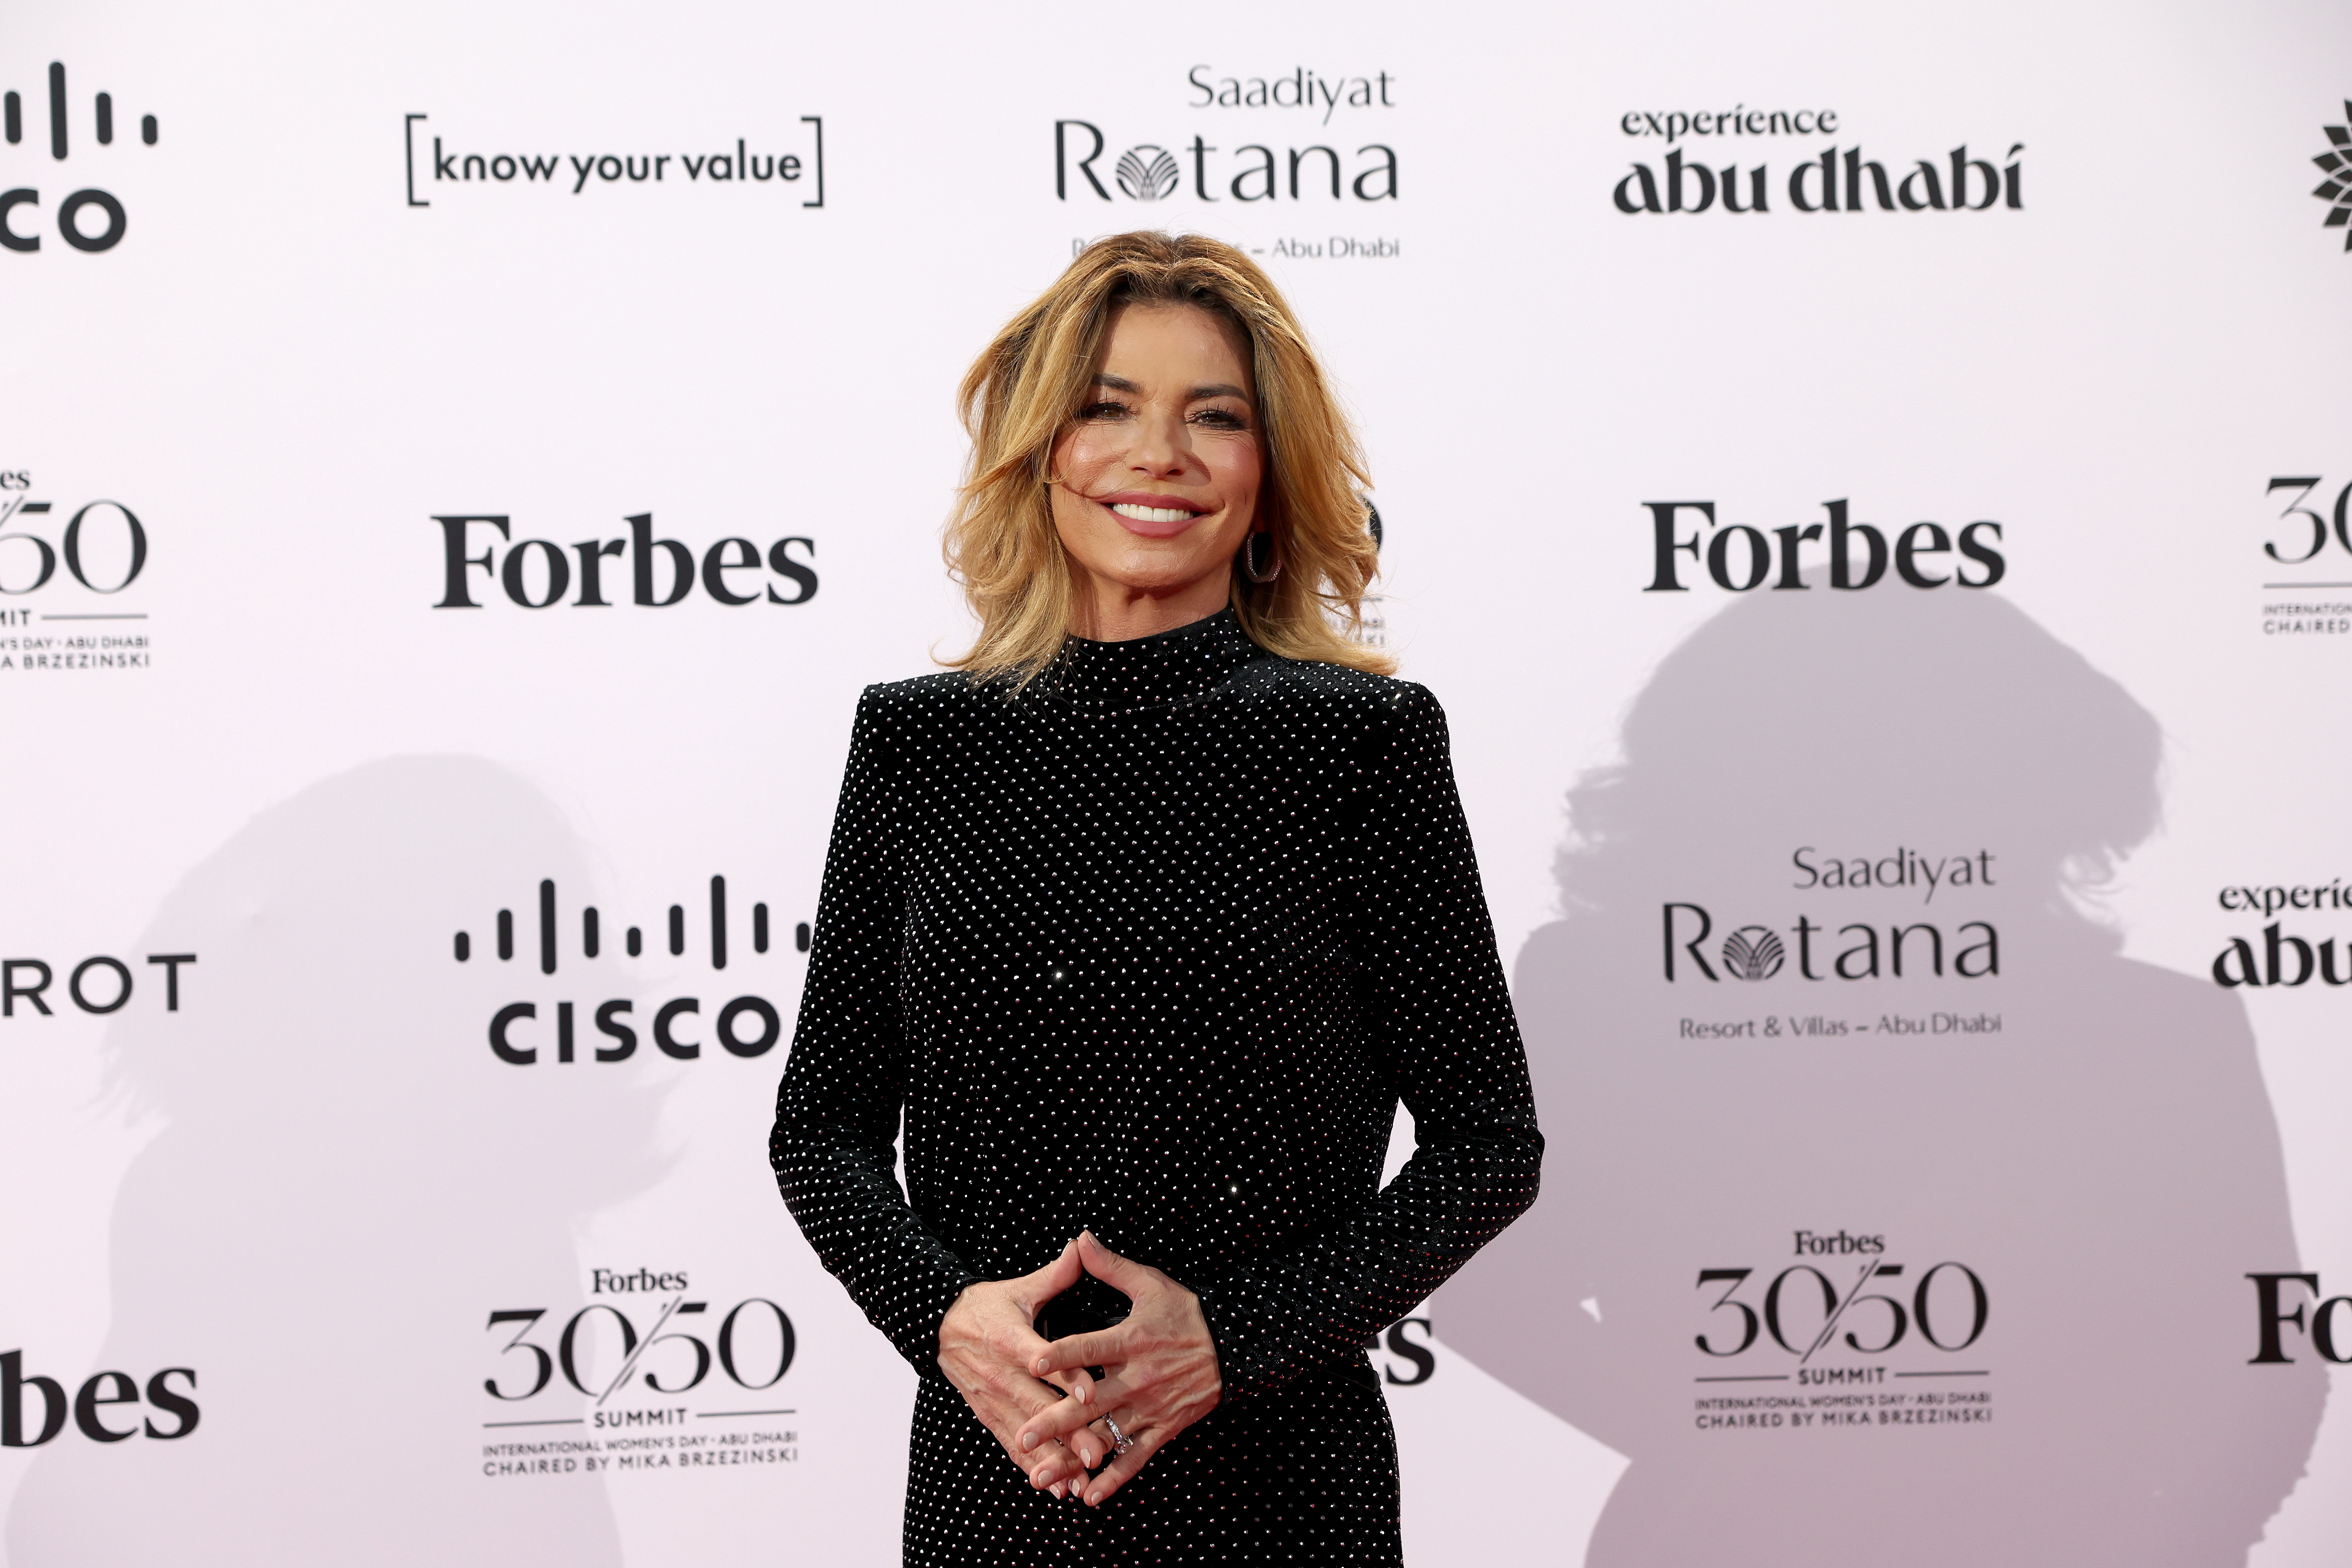 Shania recently sported brunette hair at the Forbes 30/50 Summit International Women’s Day Awards Gala